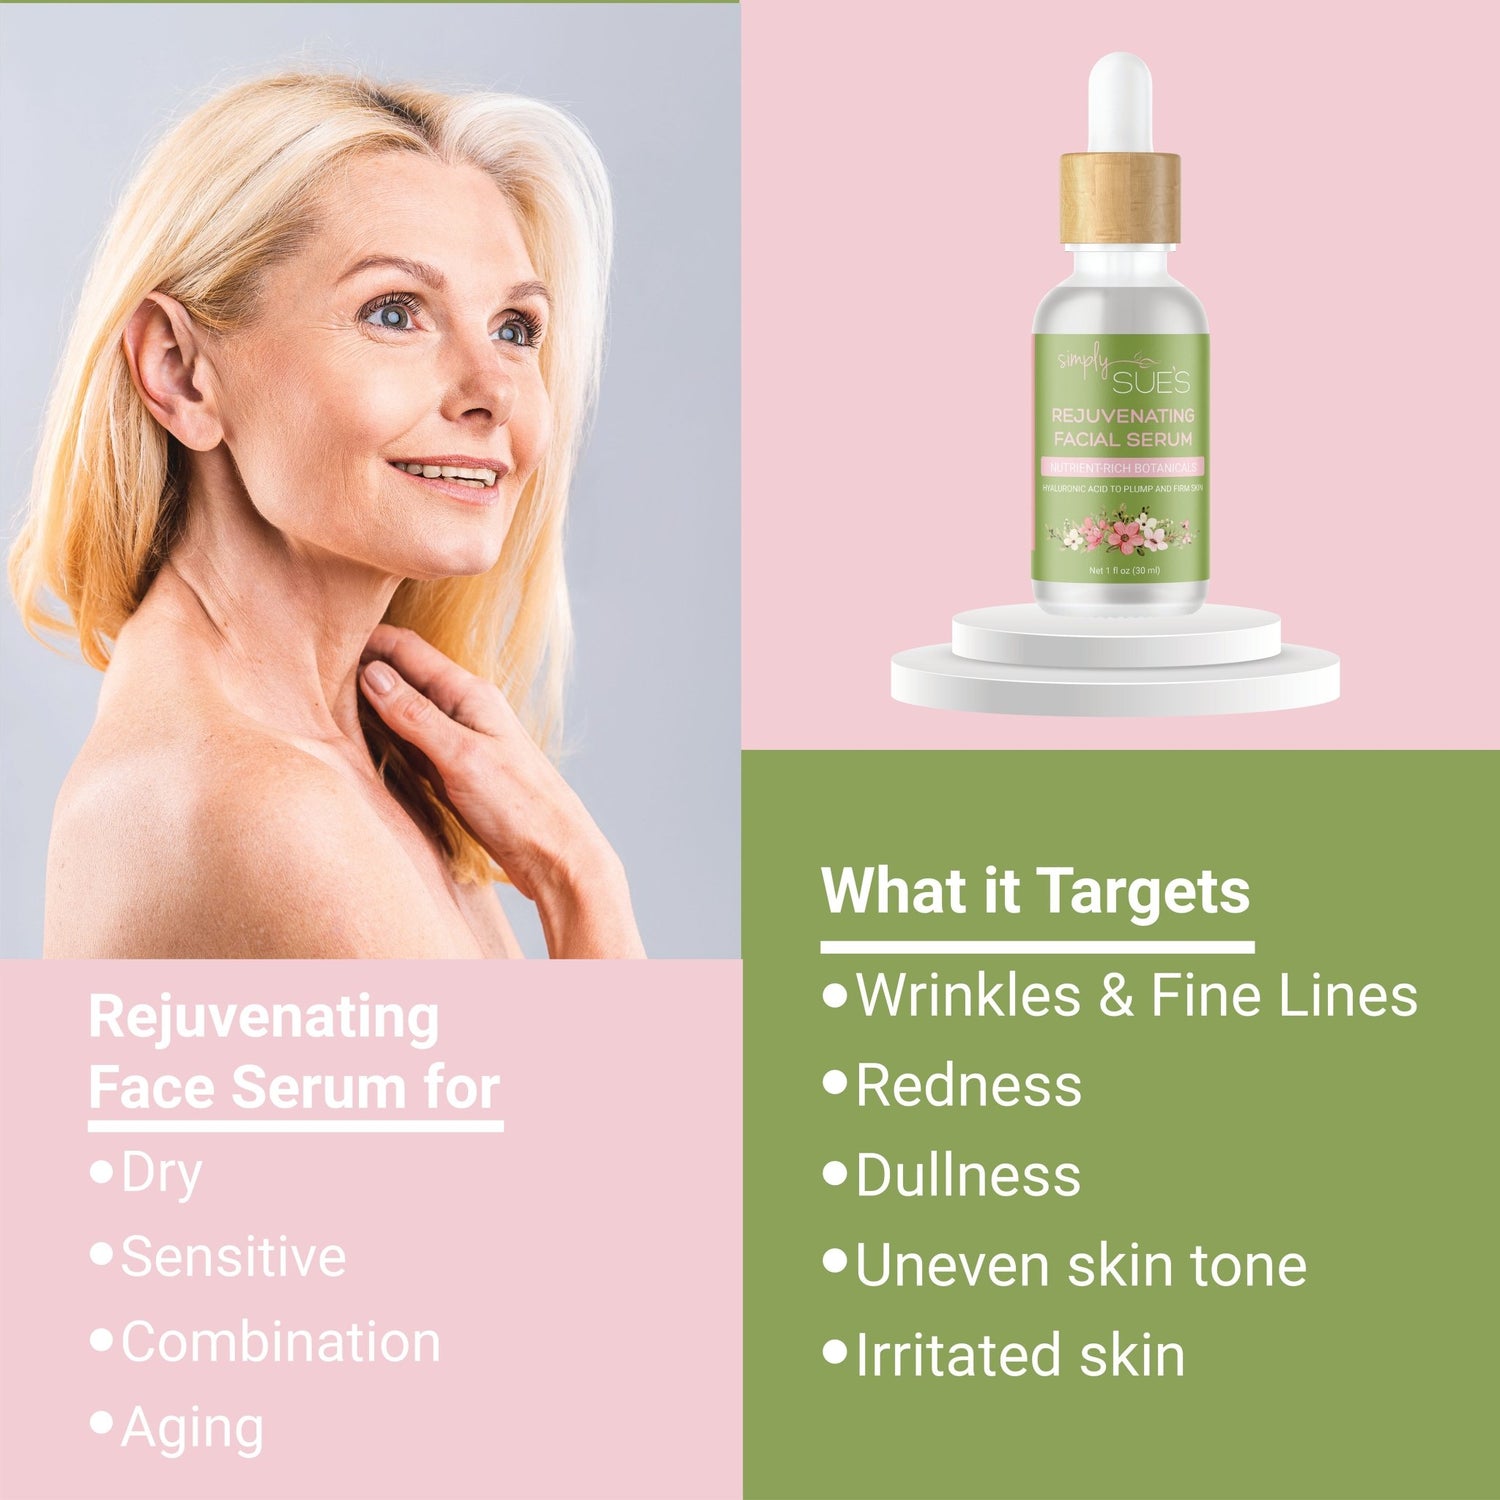 Graphic showing a mature woman, describing the type of skin the Simply Sue&